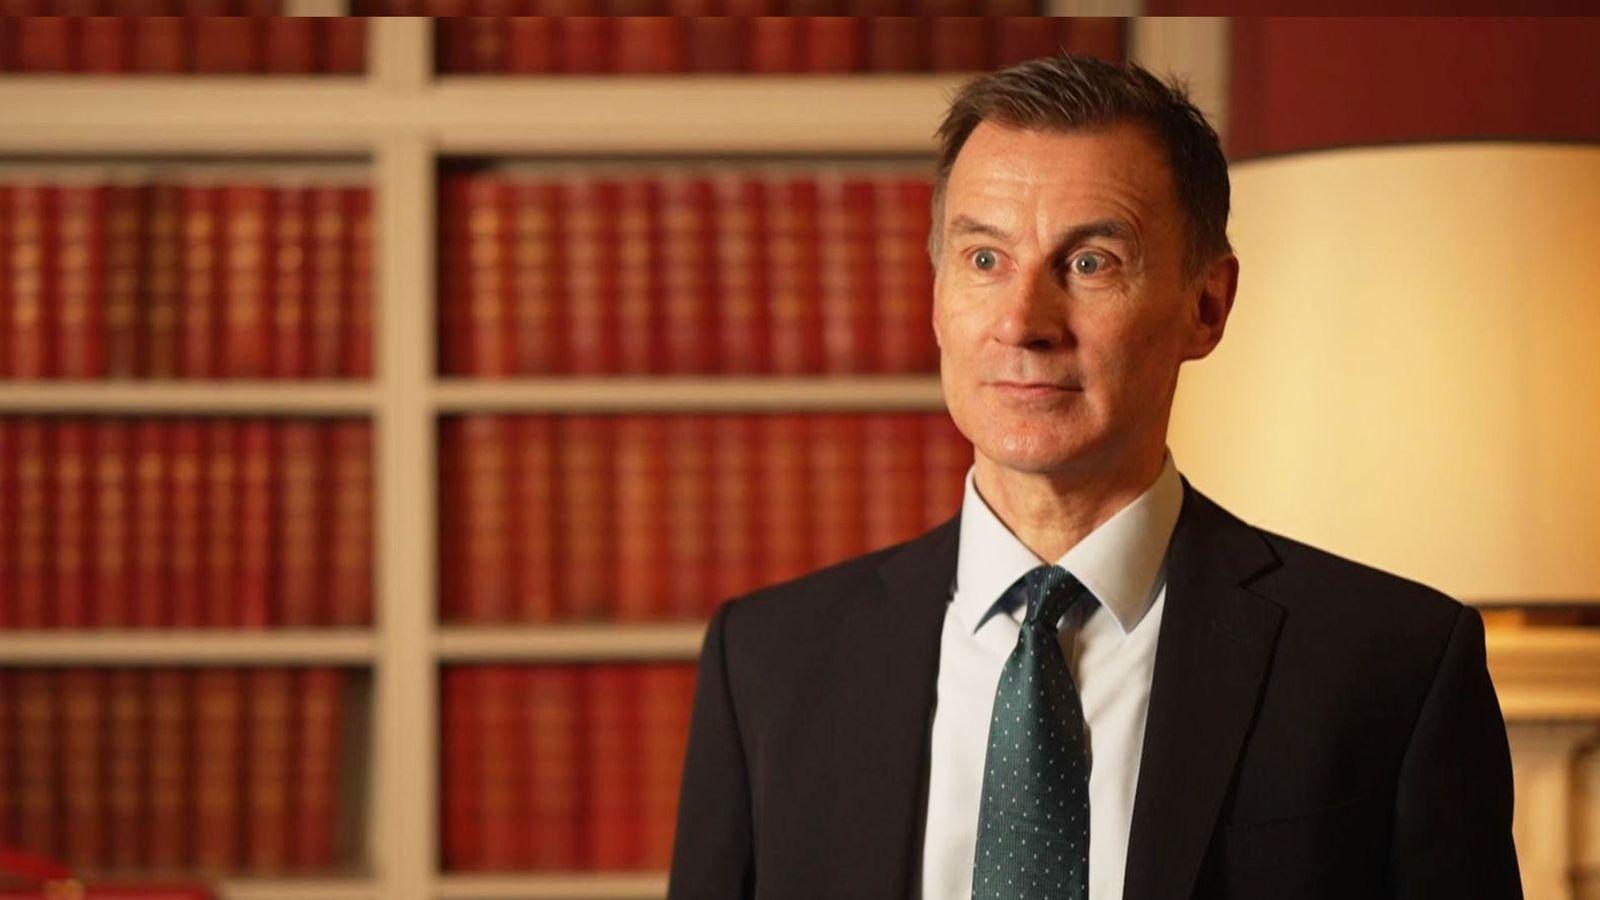 The Voters Panel: Why is Jeremy Hunt preparing to cut taxes and rein in public spending?